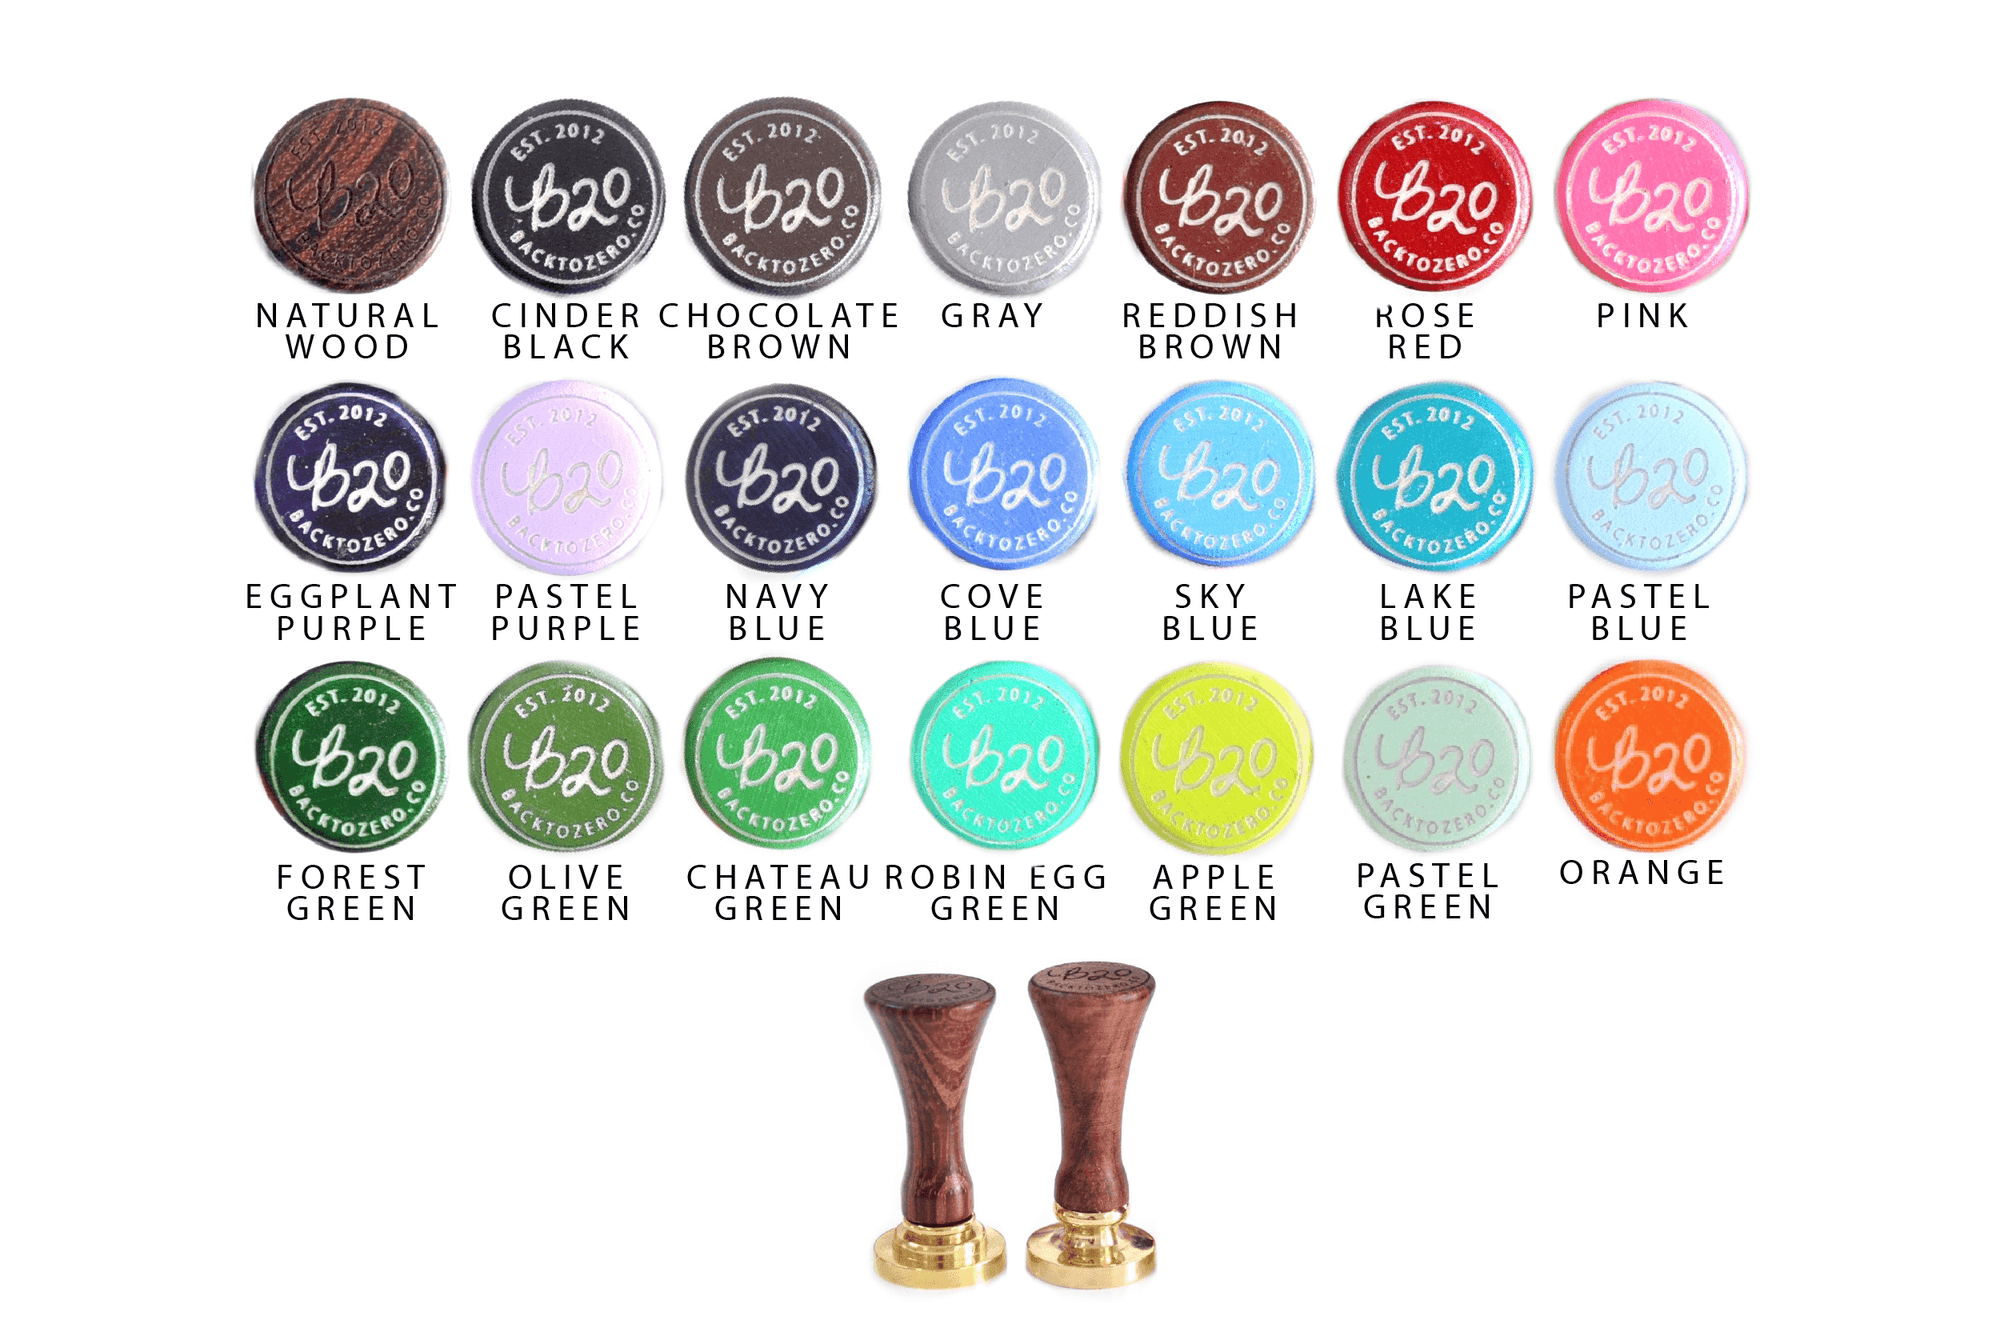 Suzanne Cunningham Calligraphy O Wax Seal Stamp | Available in 4 Sizes - Backtozero B20 - 1 initial, 1.2cm, 1initial, Calligraphy, collaboration, mini, Monogram, One initial, Personalized, signature, signaturehandle, Silver, Suzanne Cunningham, tiny